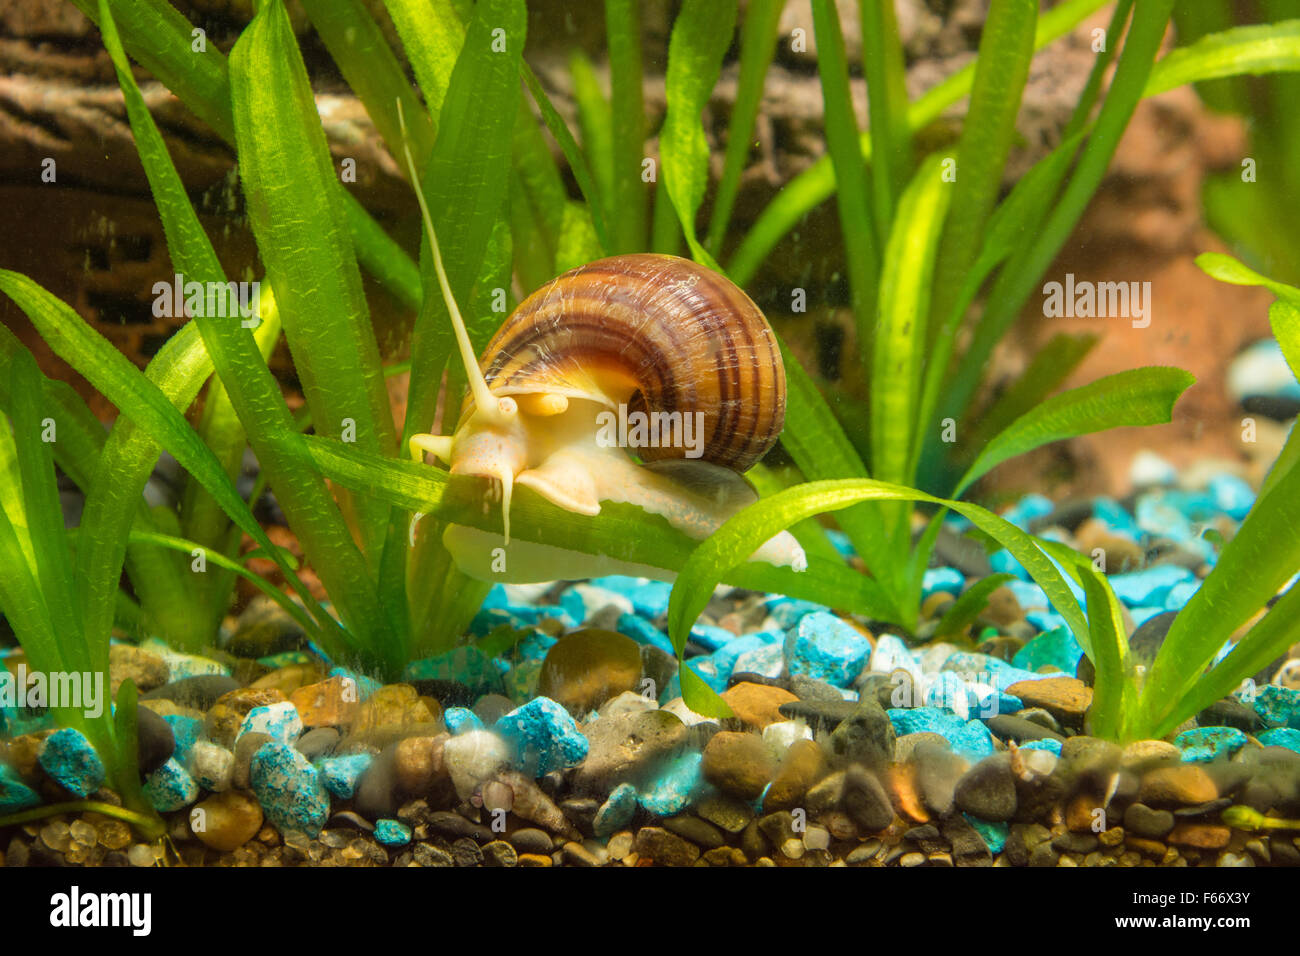 View of the two snails Ampularia a home freshwater aquarium Stock Photo